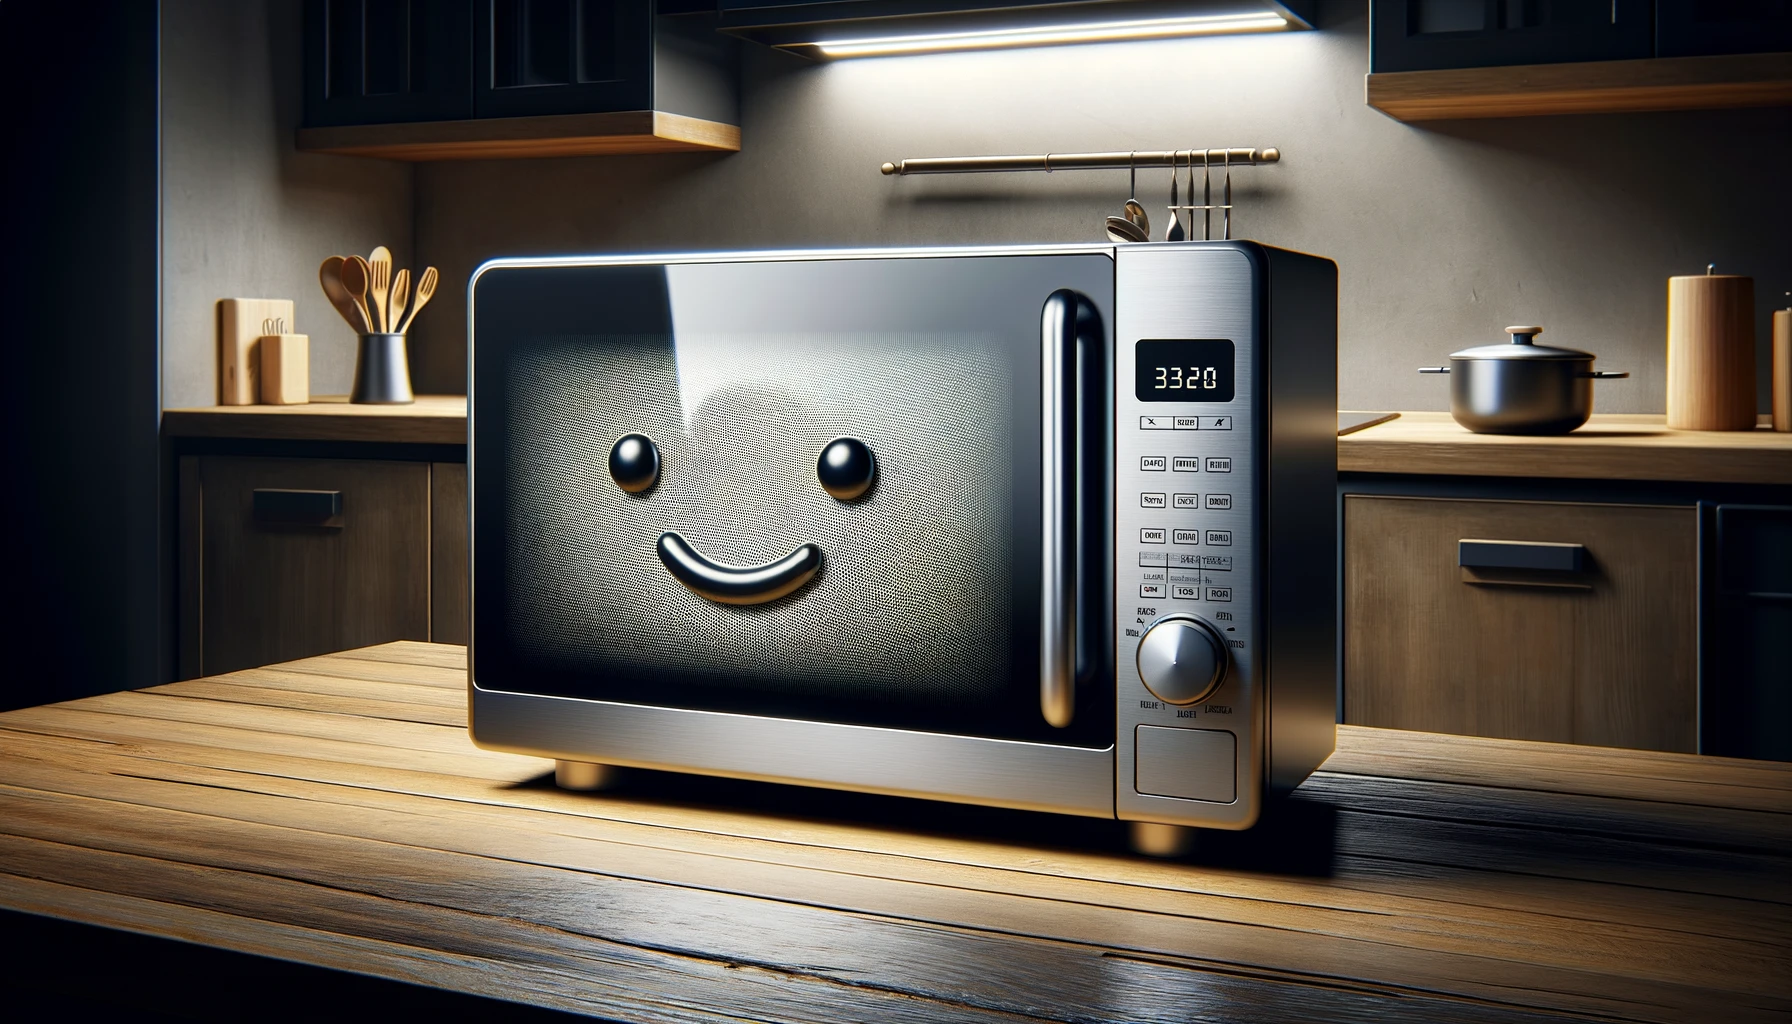 microwave features come to life